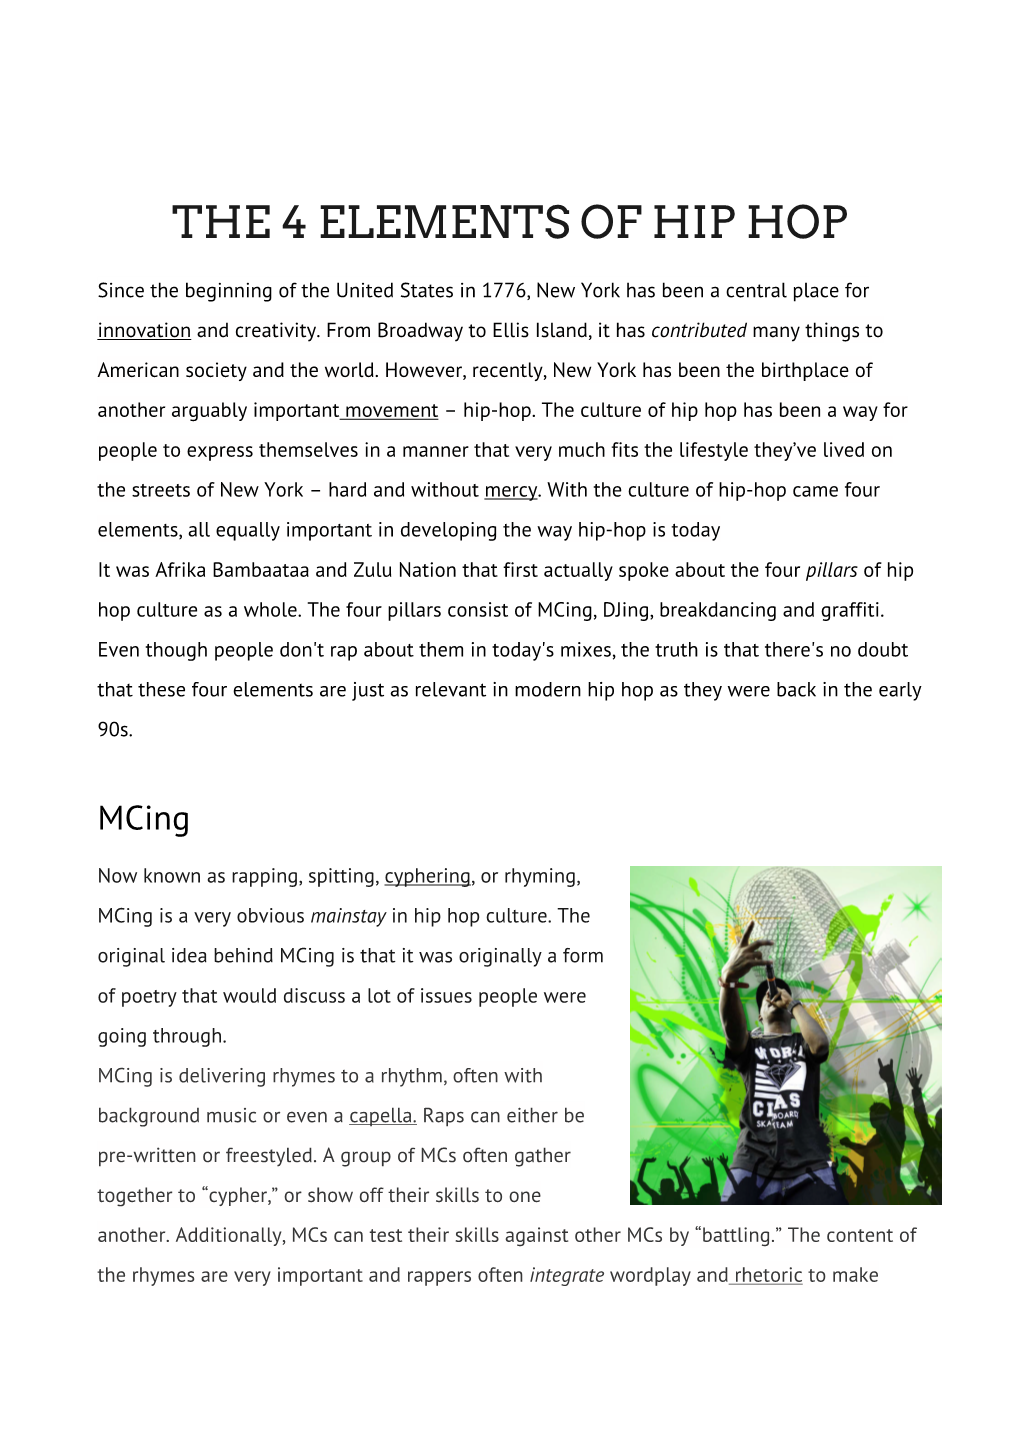 The 4 Elements of Hip Hop